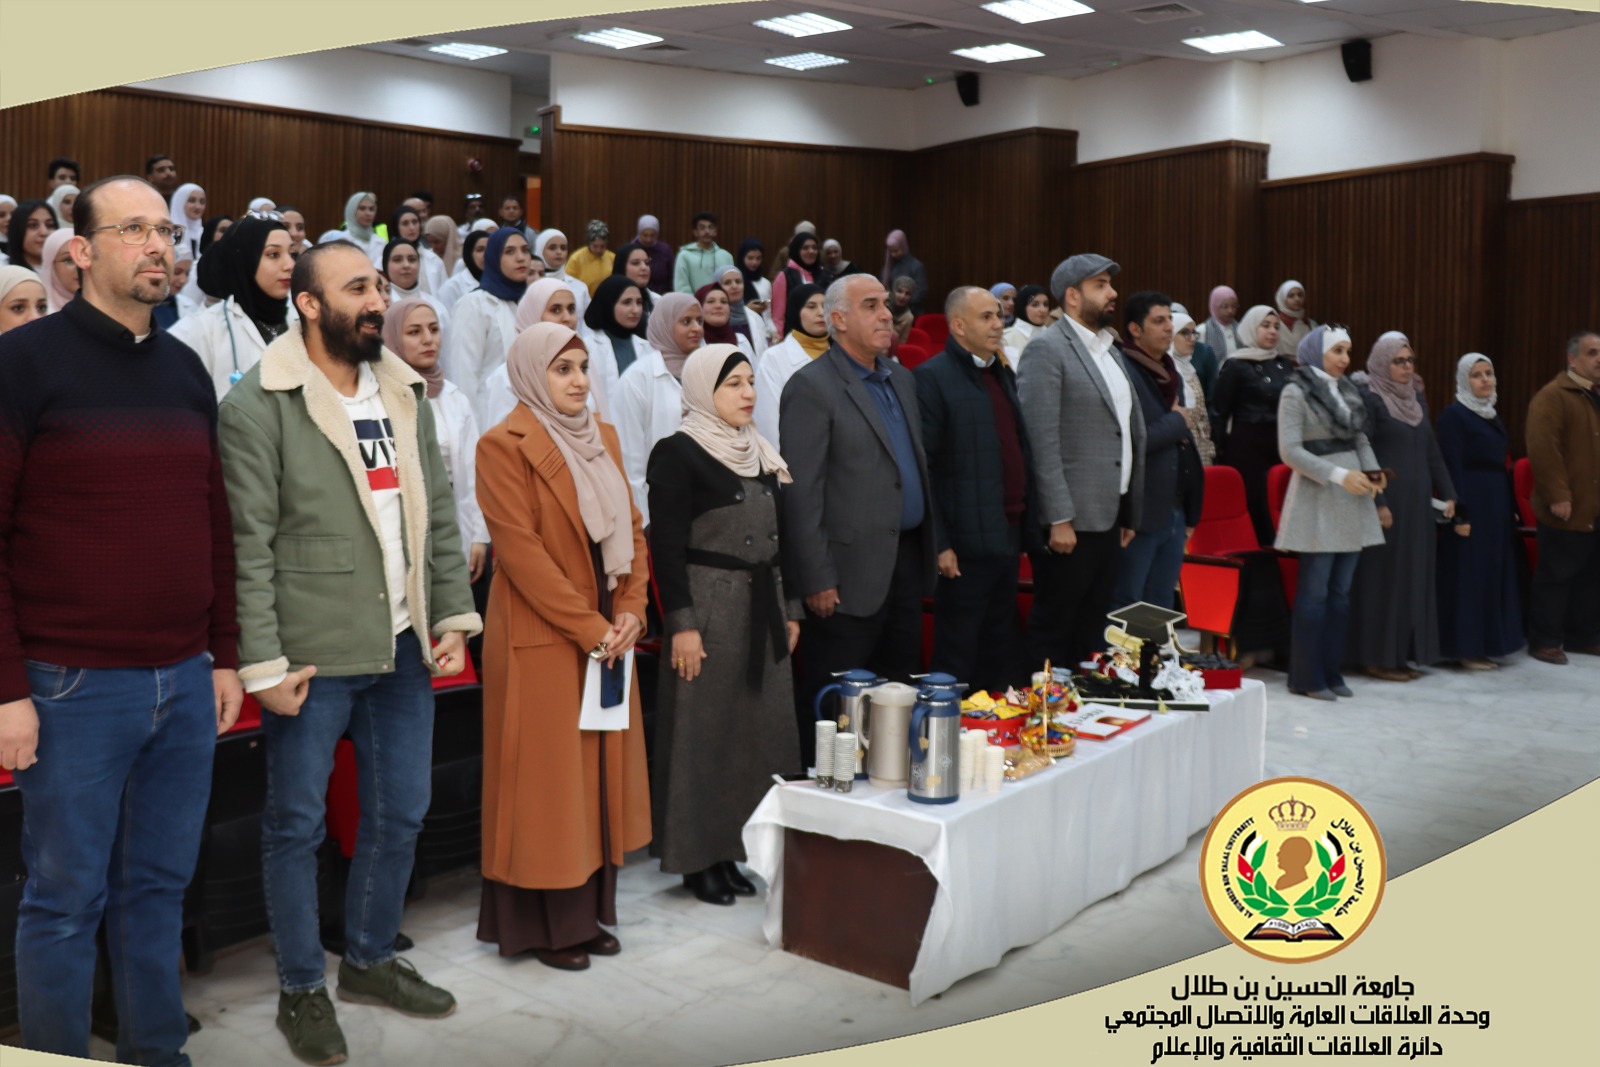 Legal oath-taking ceremony for students of the Nursing Department at Al-Hussein Bin Talal University